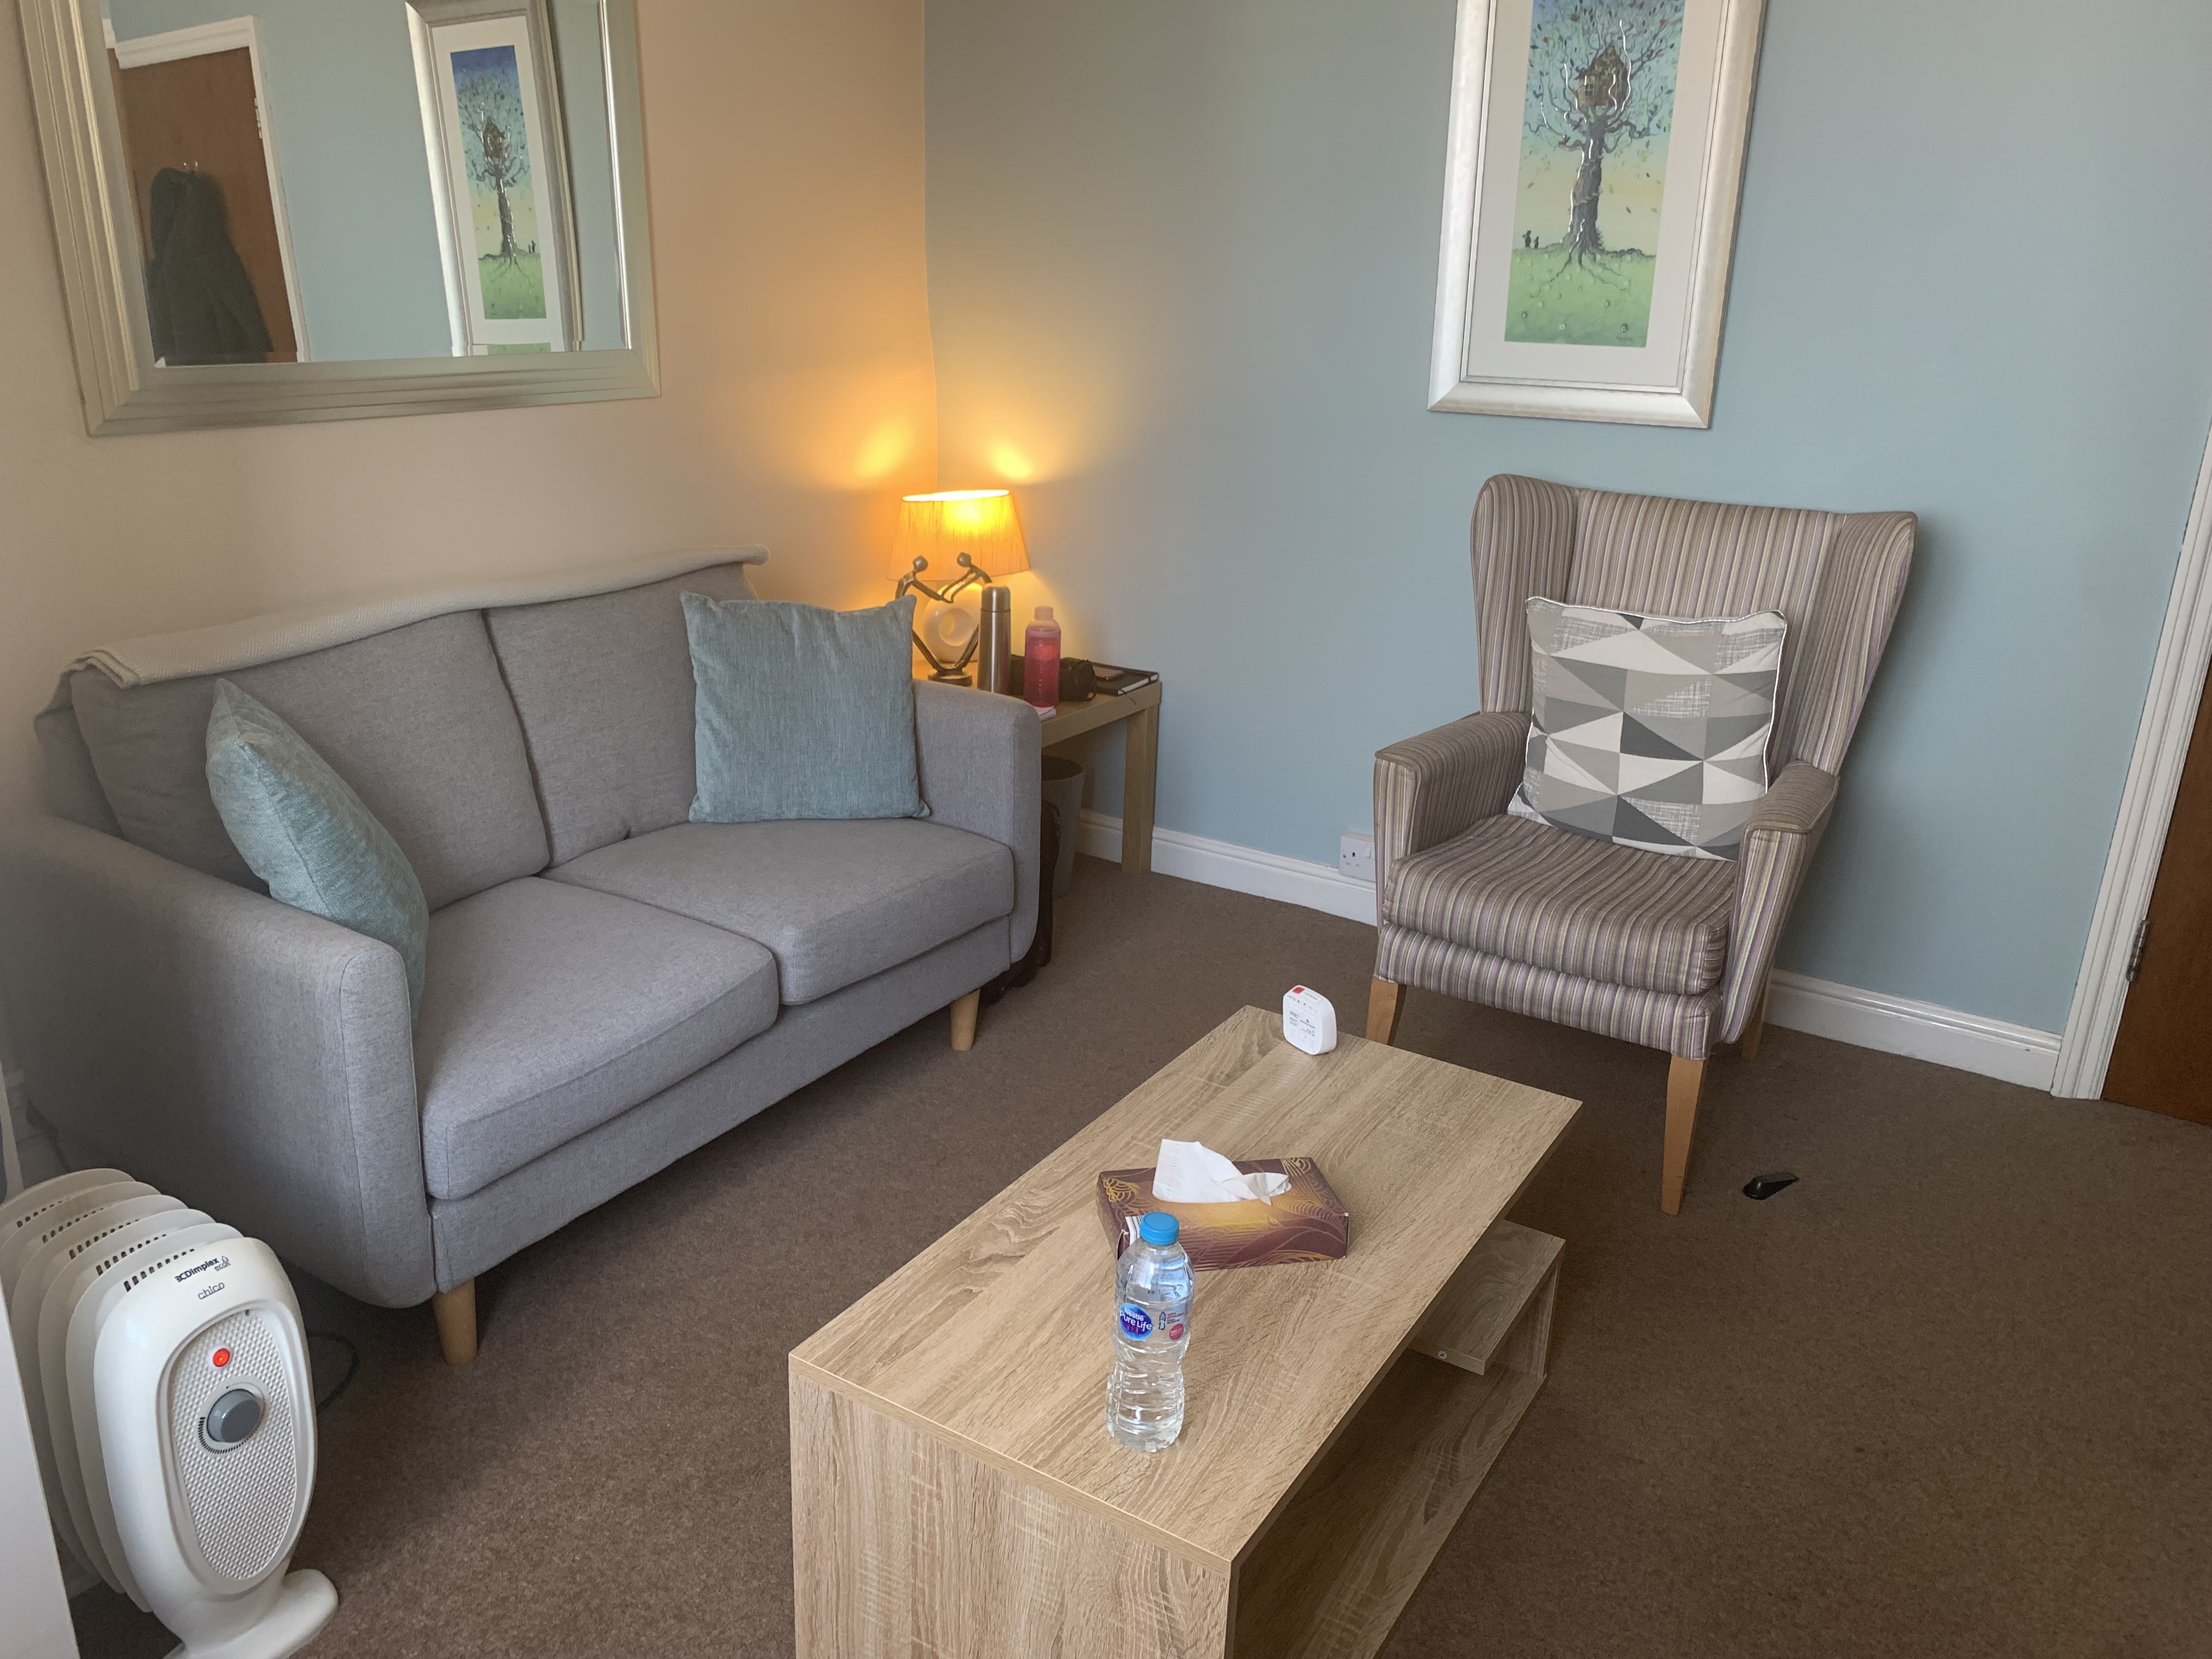 Image of the counselling room